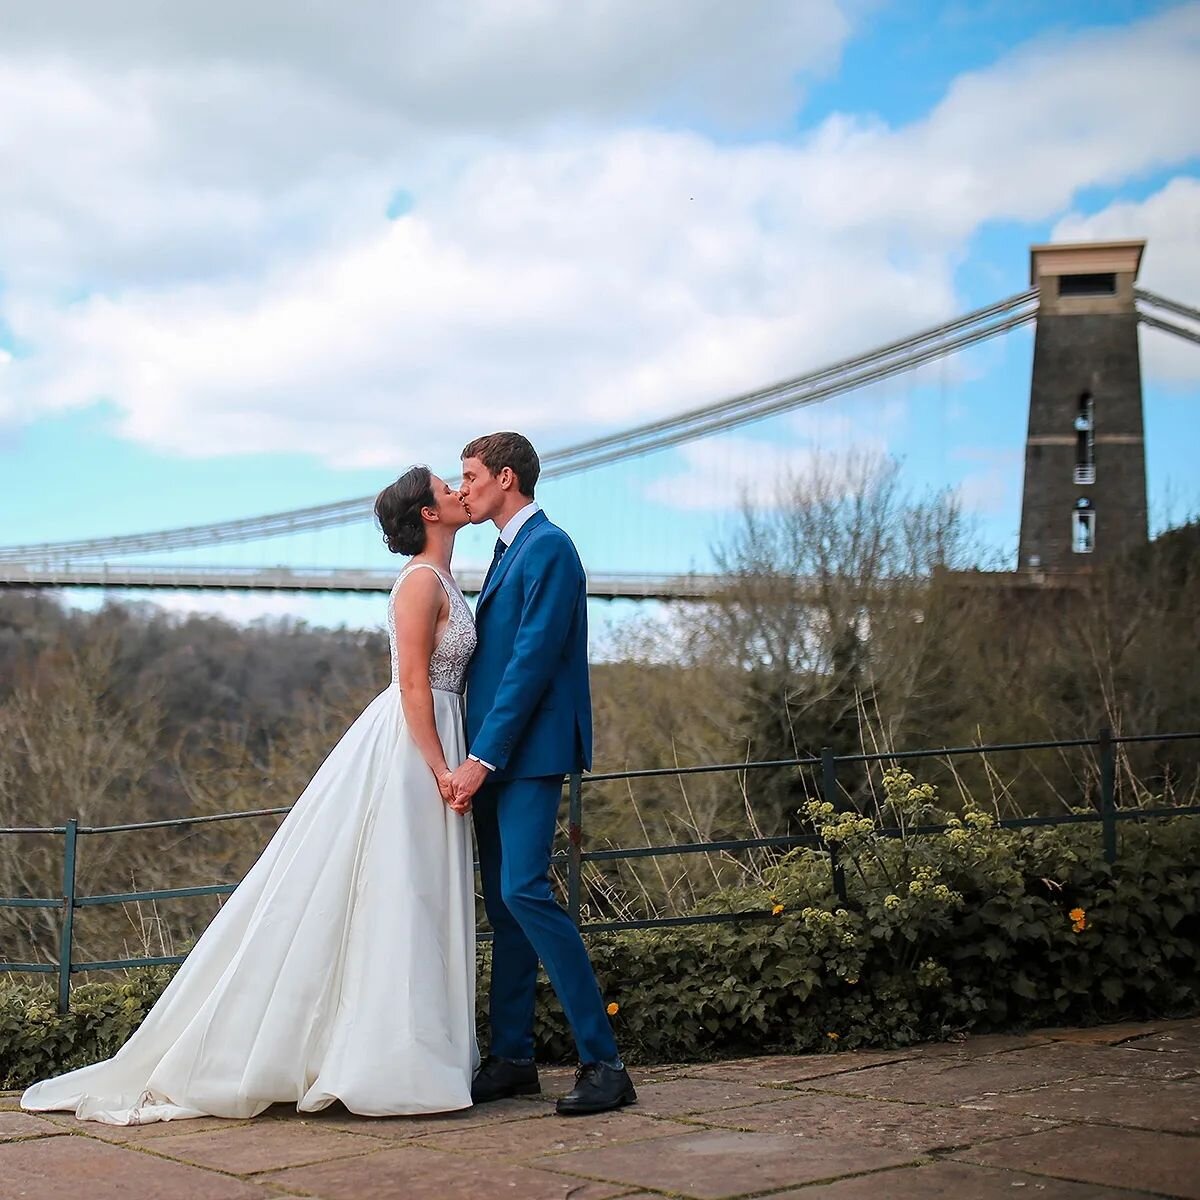 Love was in the air at the Clifton Suspension Bridge a couple of weeks back! Grace and Jack's special day was a beautiful blend of romance, joy, and stunning views of the iconic Bristol landmark. I was so grateful to have been a part of their celebra